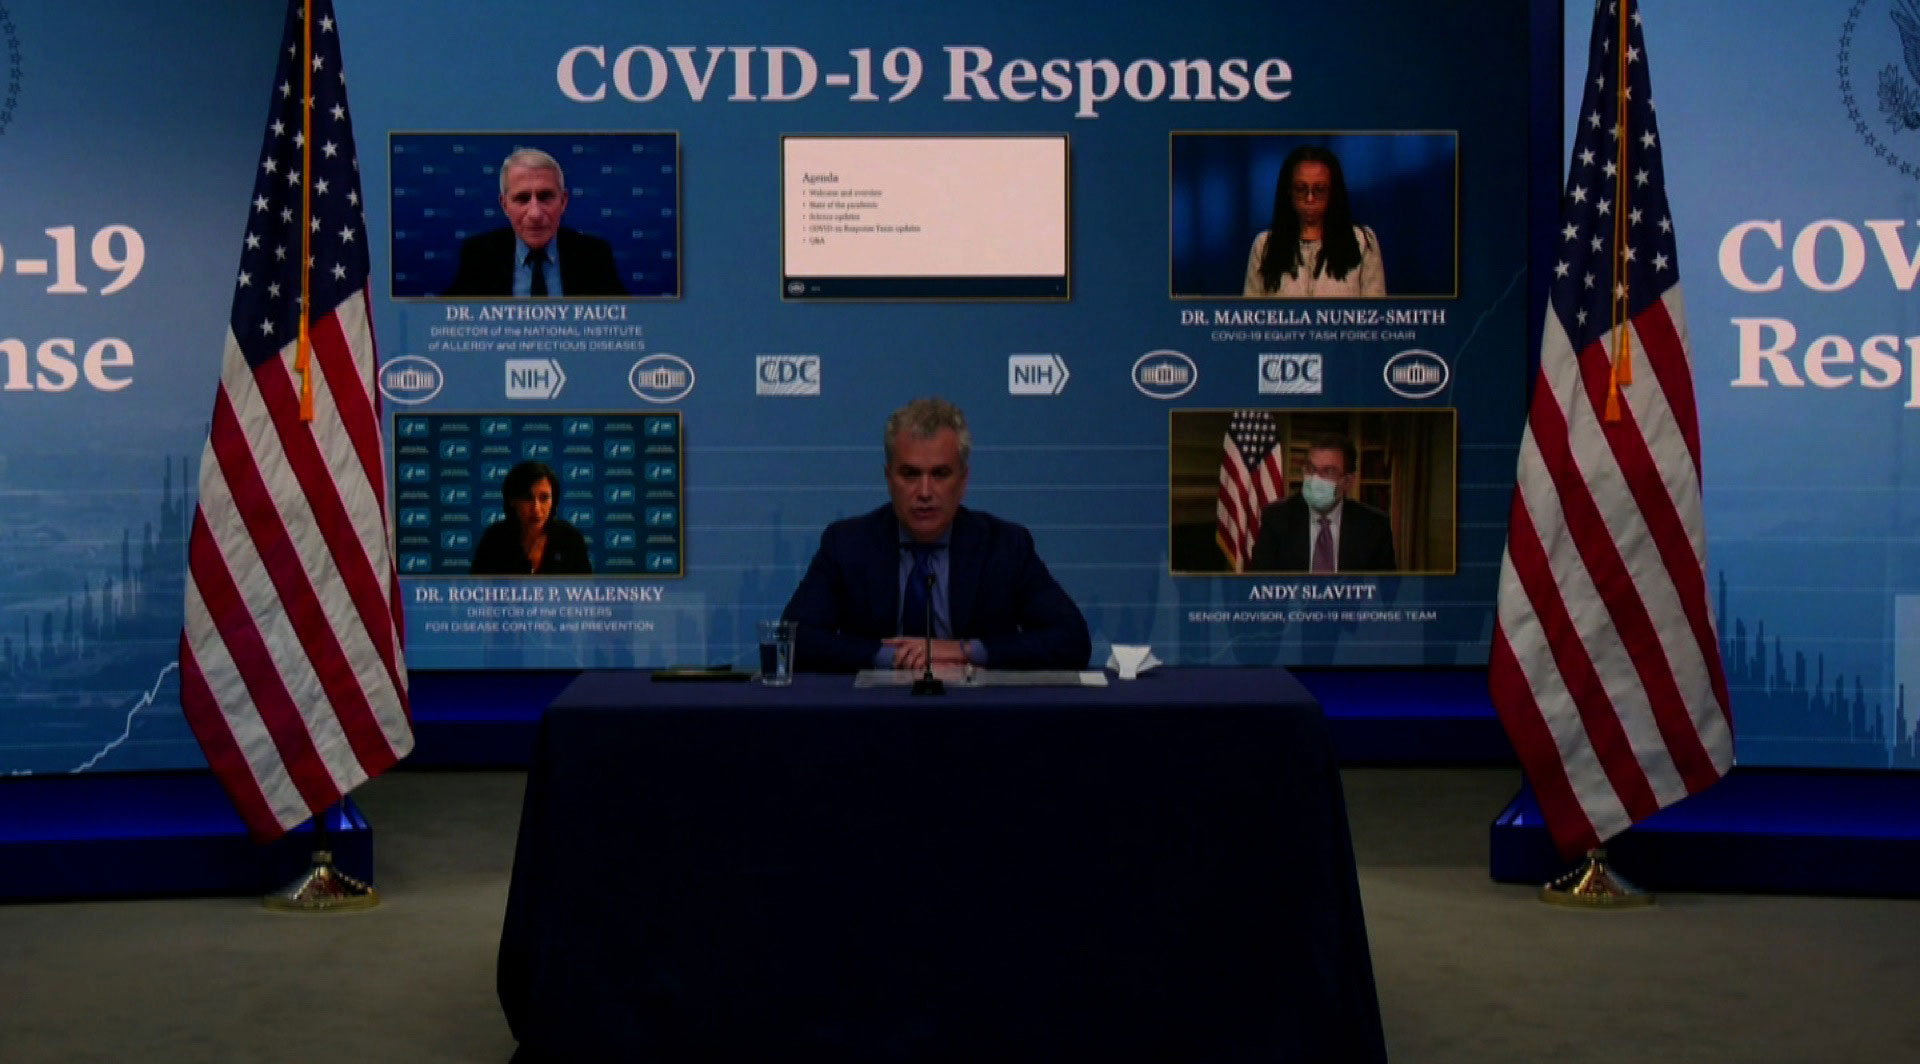 The White House Covid-19 Response Team during a briefing on January 27.